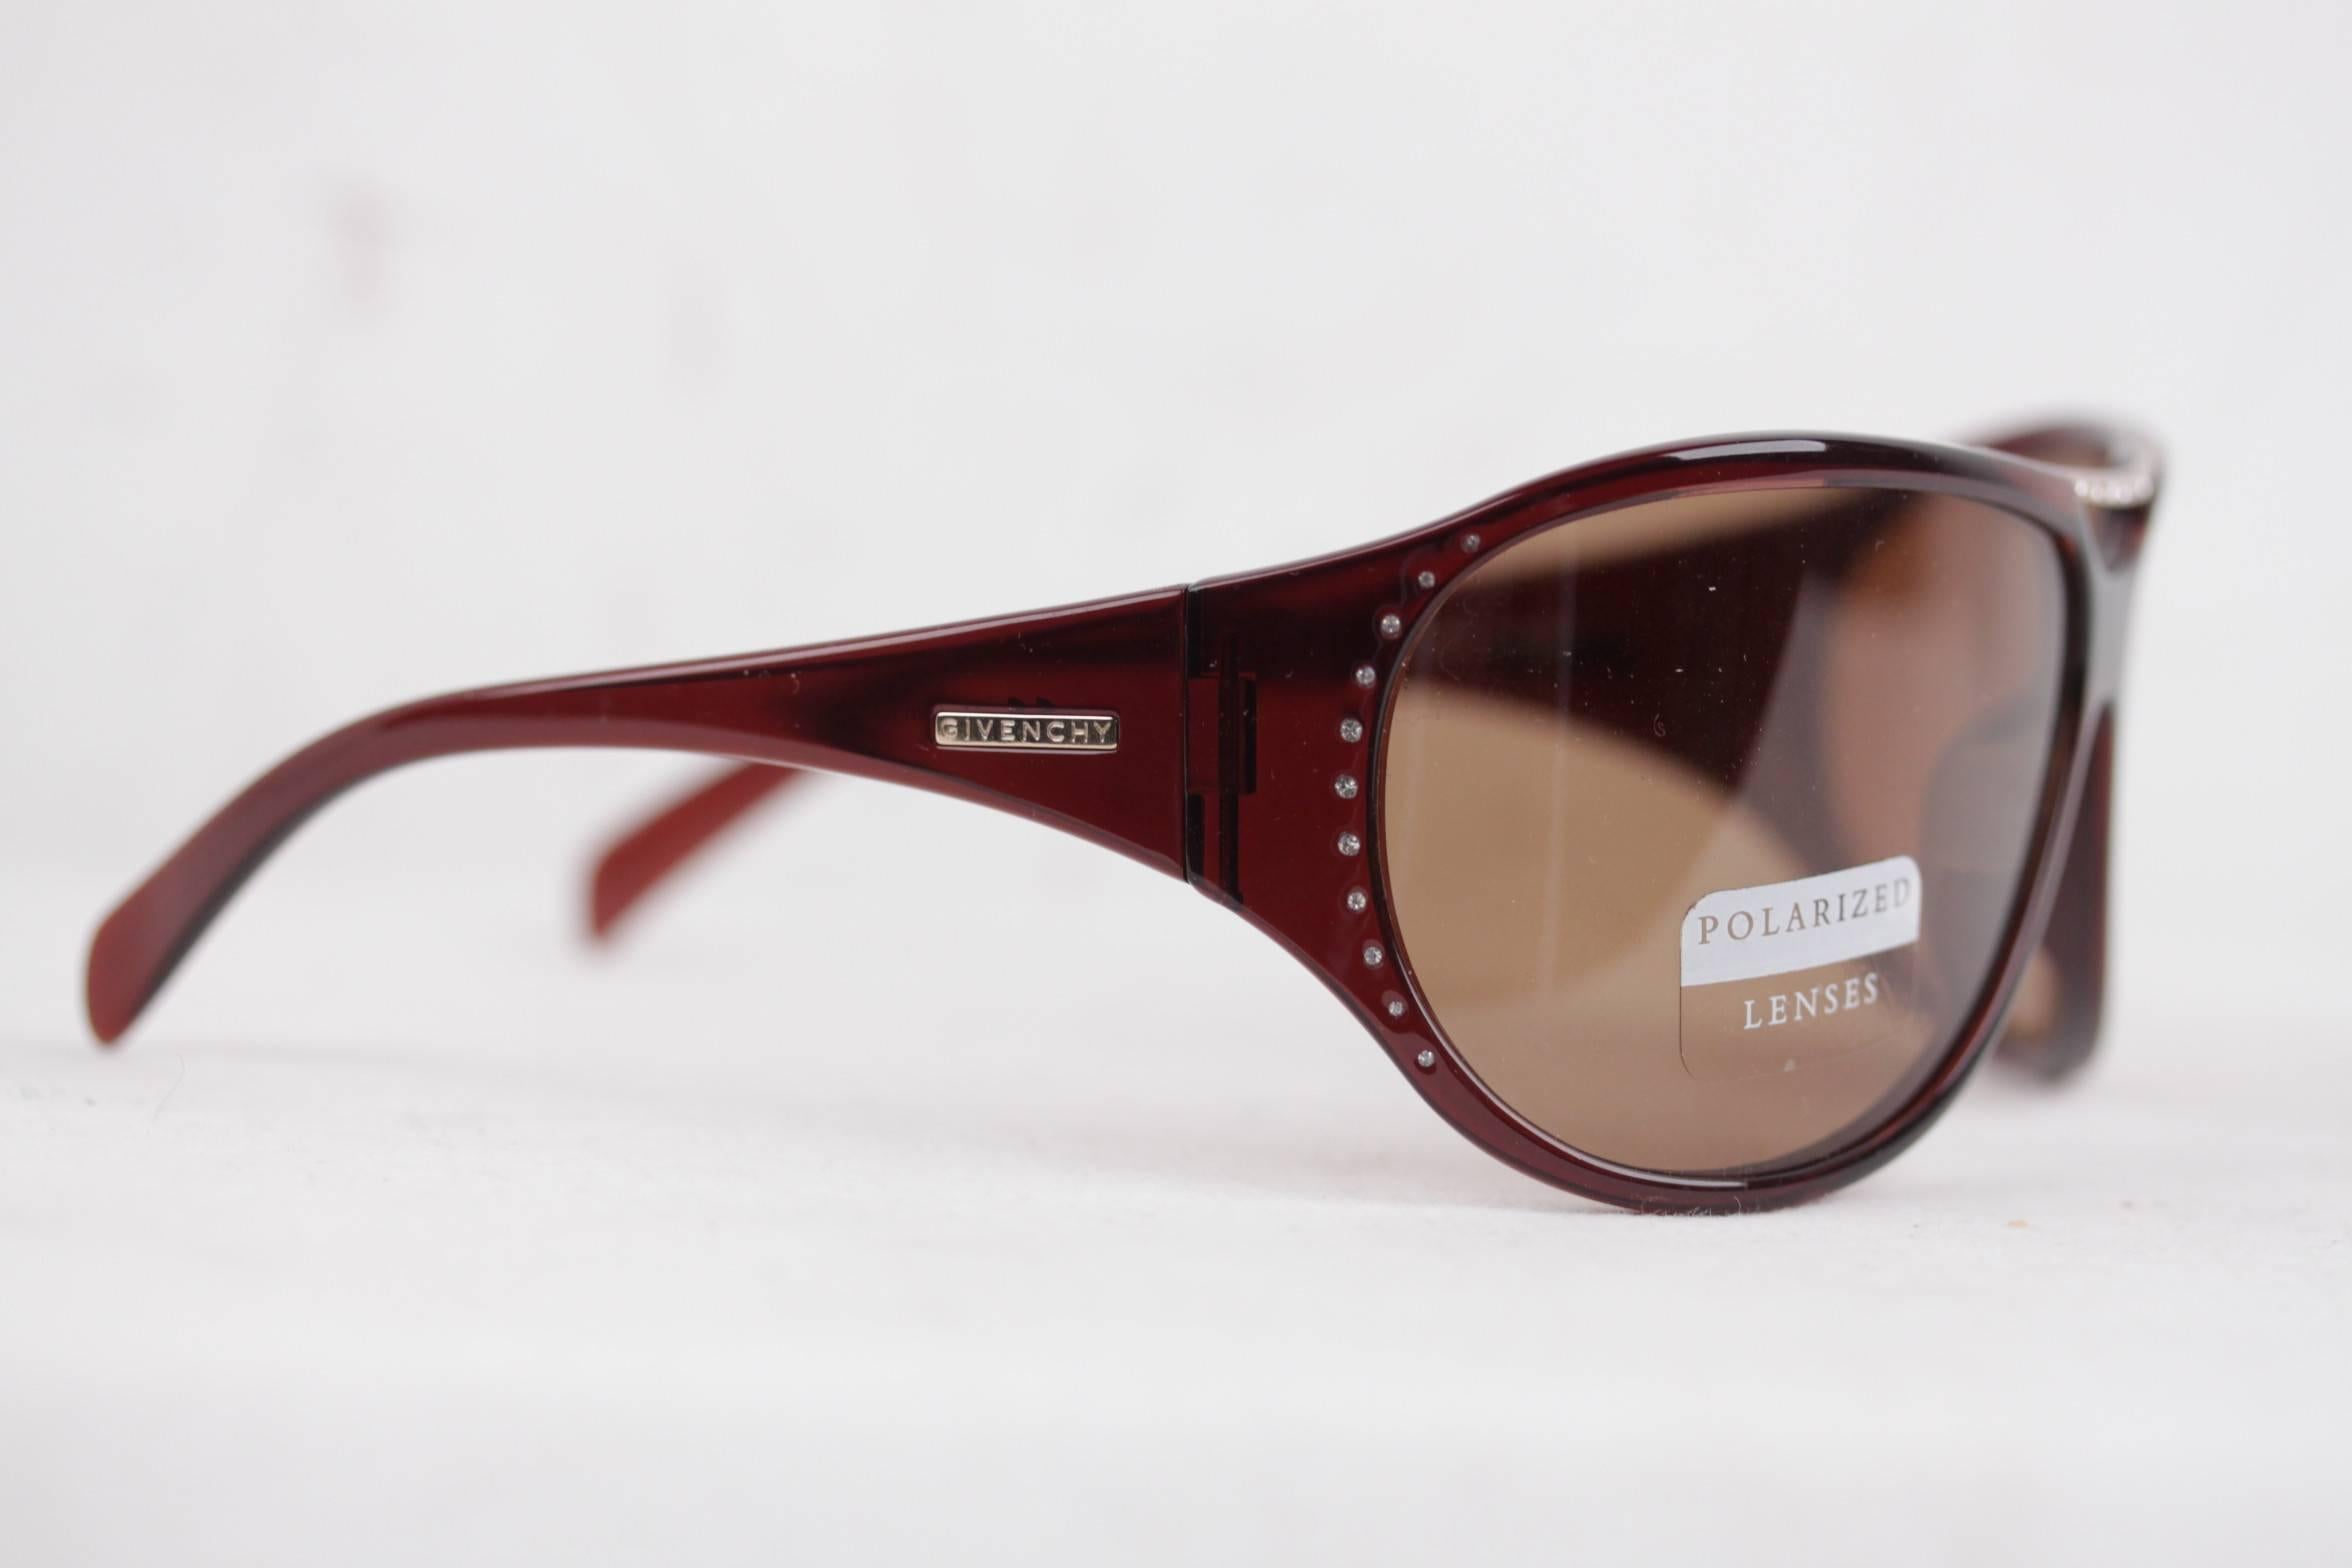 Wrap sunglasses signed GIVENCHY

brown frame, with gold side finish and GIVENCHY gold metal logo

Brown POLARIZED GIVENCHY lens

Any other detail which is not mentioned may be seen on the item pictures. Please do ask if anything is not clear,